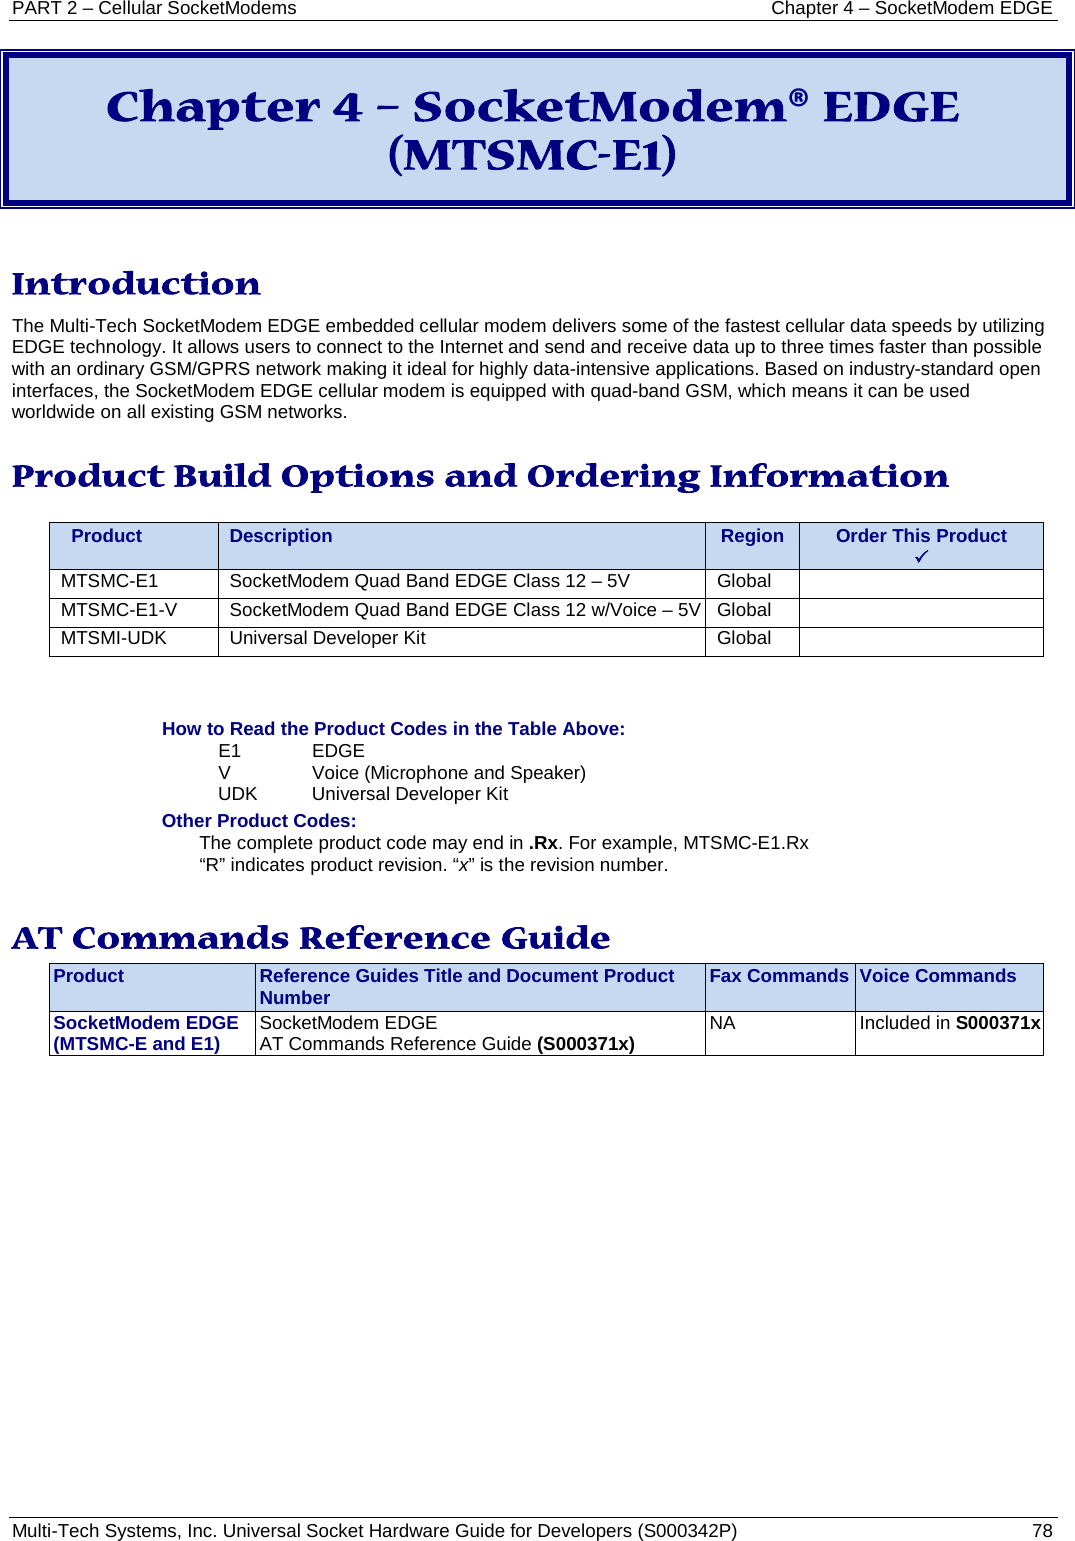 PART 2 – Cellular SocketModems Chapter 4 – SocketModem EDGE Multi-Tech Systems, Inc. Universal Socket Hardware Guide for Developers (S000342P)  78  Chapter 4 – SocketModem® EDGE (MTSMC-E1)  Introduction The Multi-Tech SocketModem EDGE embedded cellular modem delivers some of the fastest cellular data speeds by utilizing EDGE technology. It allows users to connect to the Internet and send and receive data up to three times faster than possible with an ordinary GSM/GPRS network making it ideal for highly data-intensive applications. Based on industry-standard open interfaces, the SocketModem EDGE cellular modem is equipped with quad-band GSM, which means it can be used worldwide on all existing GSM networks.  Product Build Options and Ordering Information    Product Description Region Order This Product  MTSMC-E1 SocketModem Quad Band EDGE Class 12 – 5V Global  MTSMC-E1-V SocketModem Quad Band EDGE Class 12 w/Voice – 5V Global  MTSMI-UDK Universal Developer Kit Global    How to Read the Product Codes in the Table Above: E1  EDGE V  Voice (Microphone and Speaker) UDK Universal Developer Kit Other Product Codes: The complete product code may end in .Rx. For example, MTSMC-E1.Rx   “R” indicates product revision. “x” is the revision number.  AT Commands Reference Guide Product Reference Guides Title and Document Product Number Fax Commands Voice Commands SocketModem EDGE (MTSMC-E and E1) SocketModem EDGE  AT Commands Reference Guide (S000371x) NA Included in S000371x    